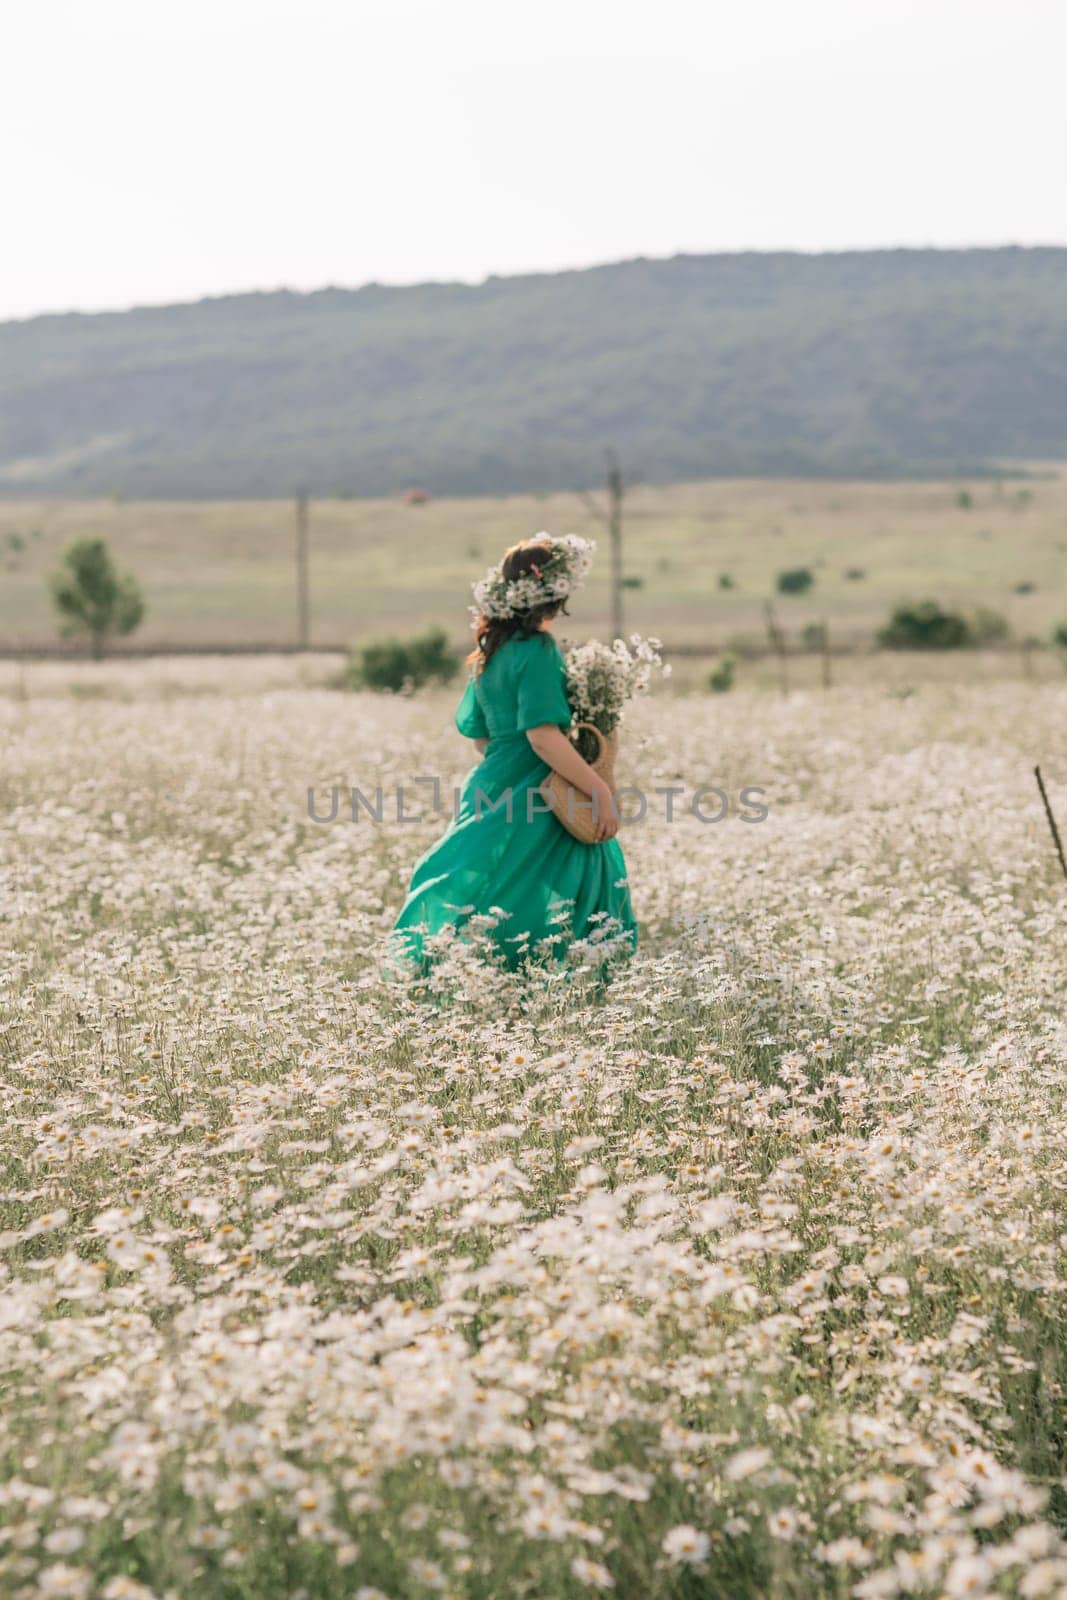 Happy woman in a field of daisies with a wreath of wildflowers on her head. woman in a green dress in a field of white flowers. Charming woman with a bouquet of daisies, tender summer photo by Matiunina